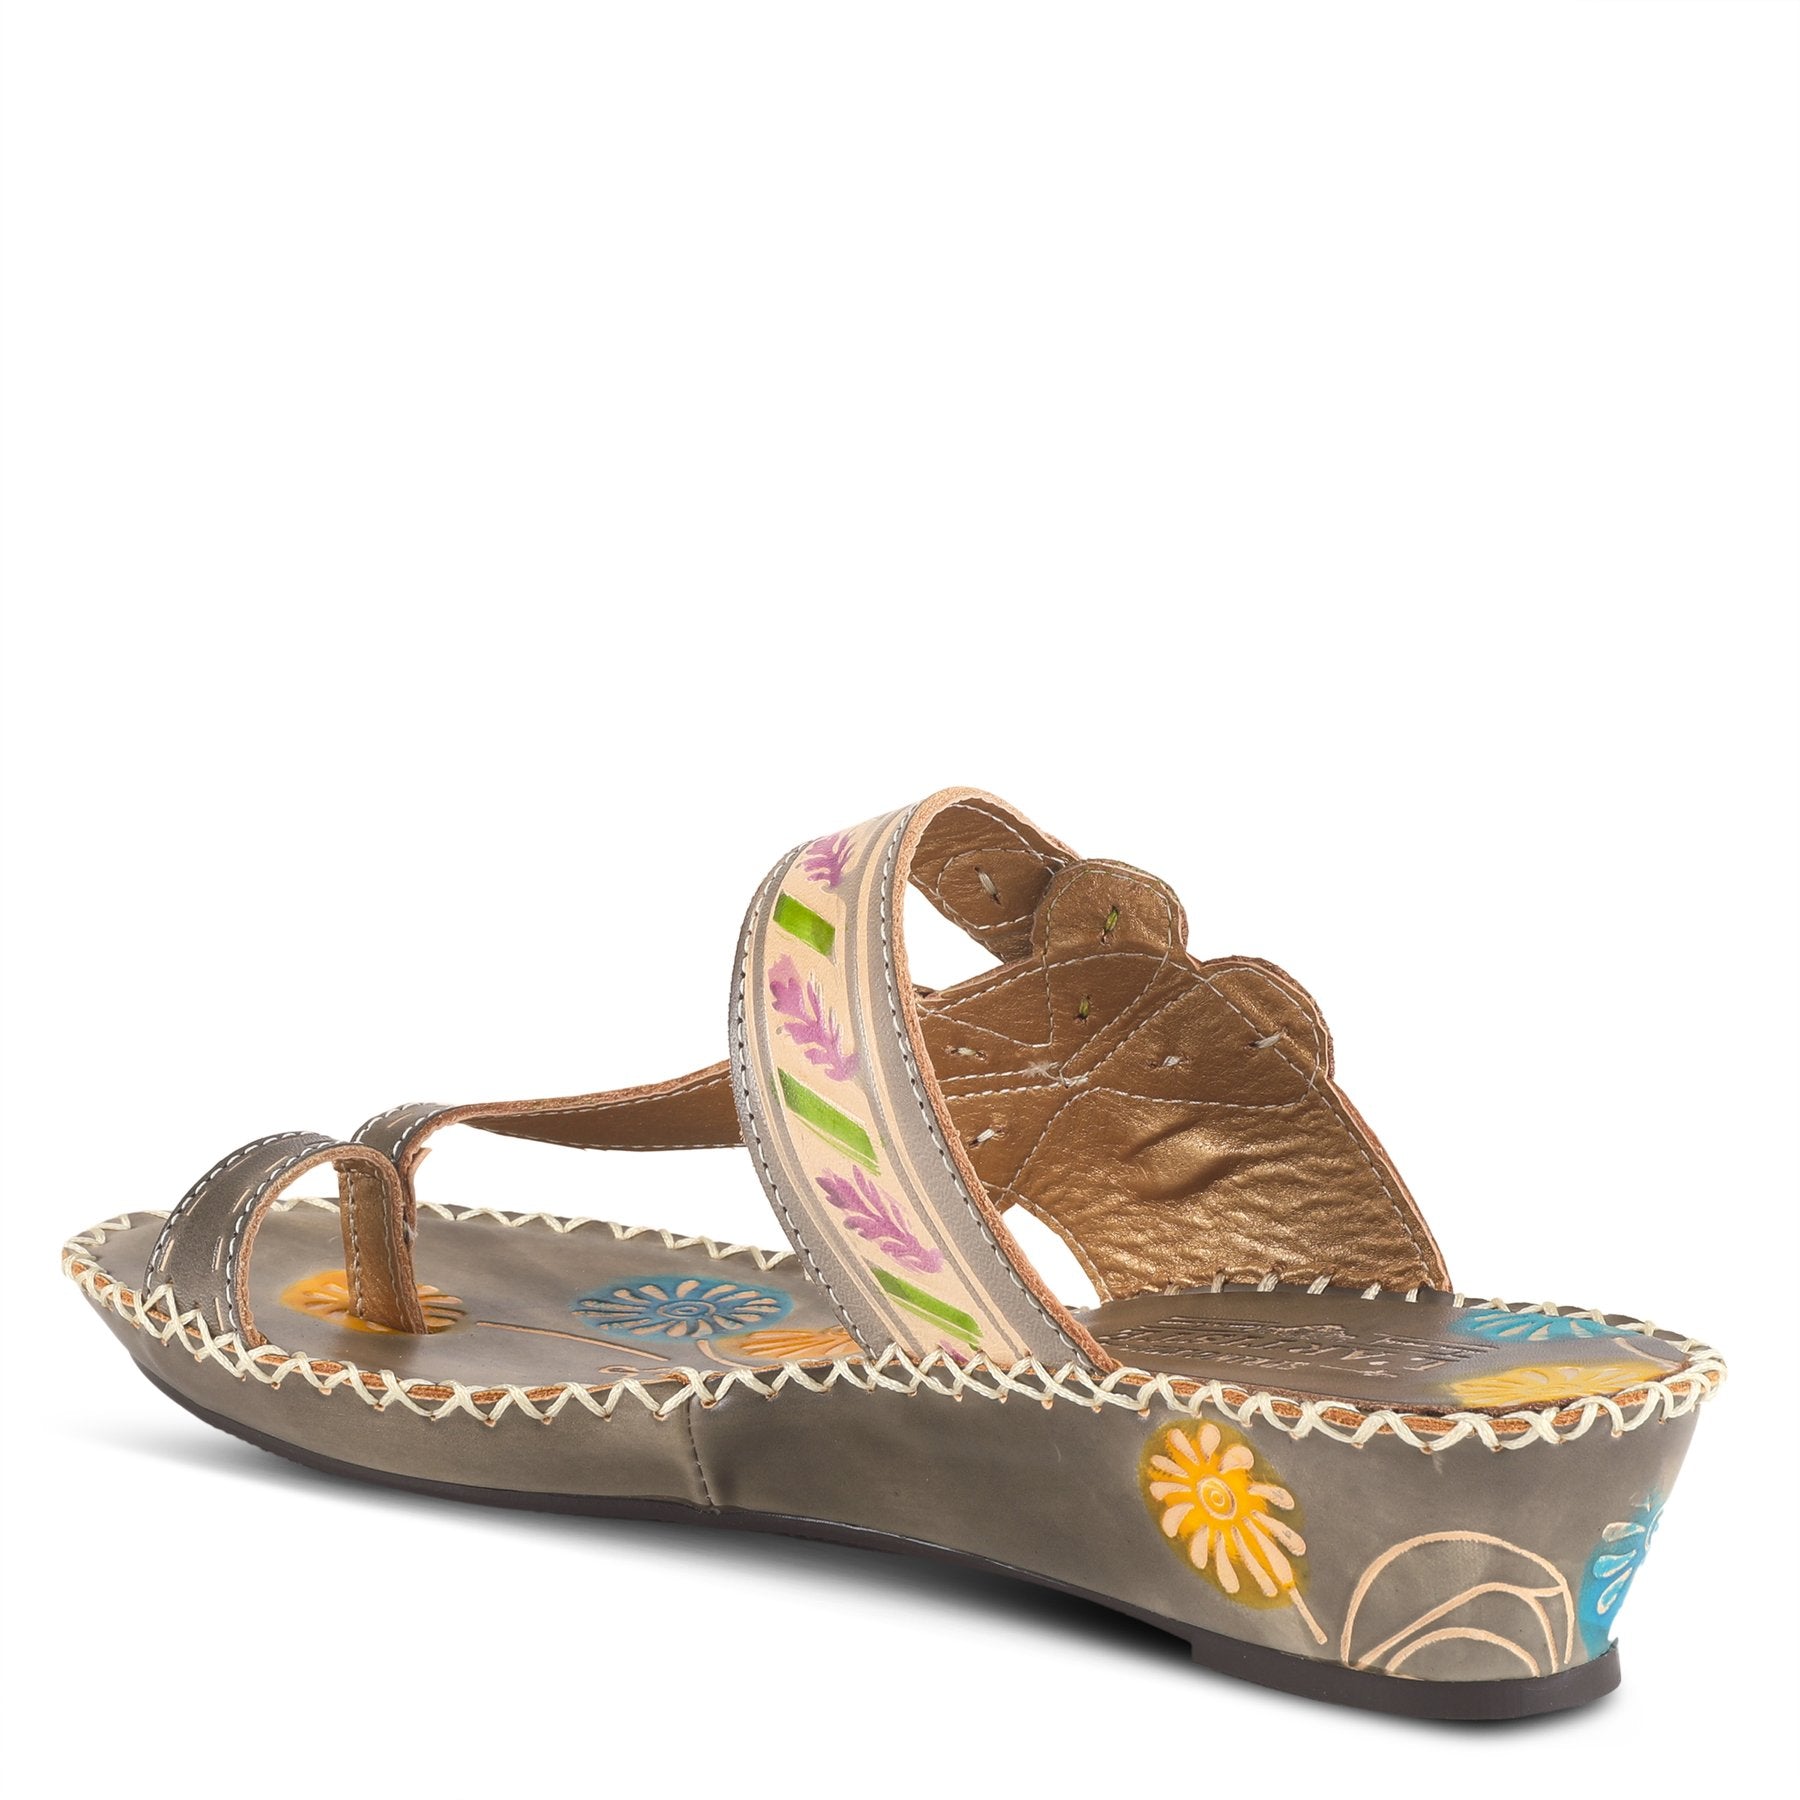 Outer back side of the l'artiste santorini slide sandal. This sandal is grey with colorful flowers painted all over the sole, a toe-ring thong, and an adjustable buckle strap.